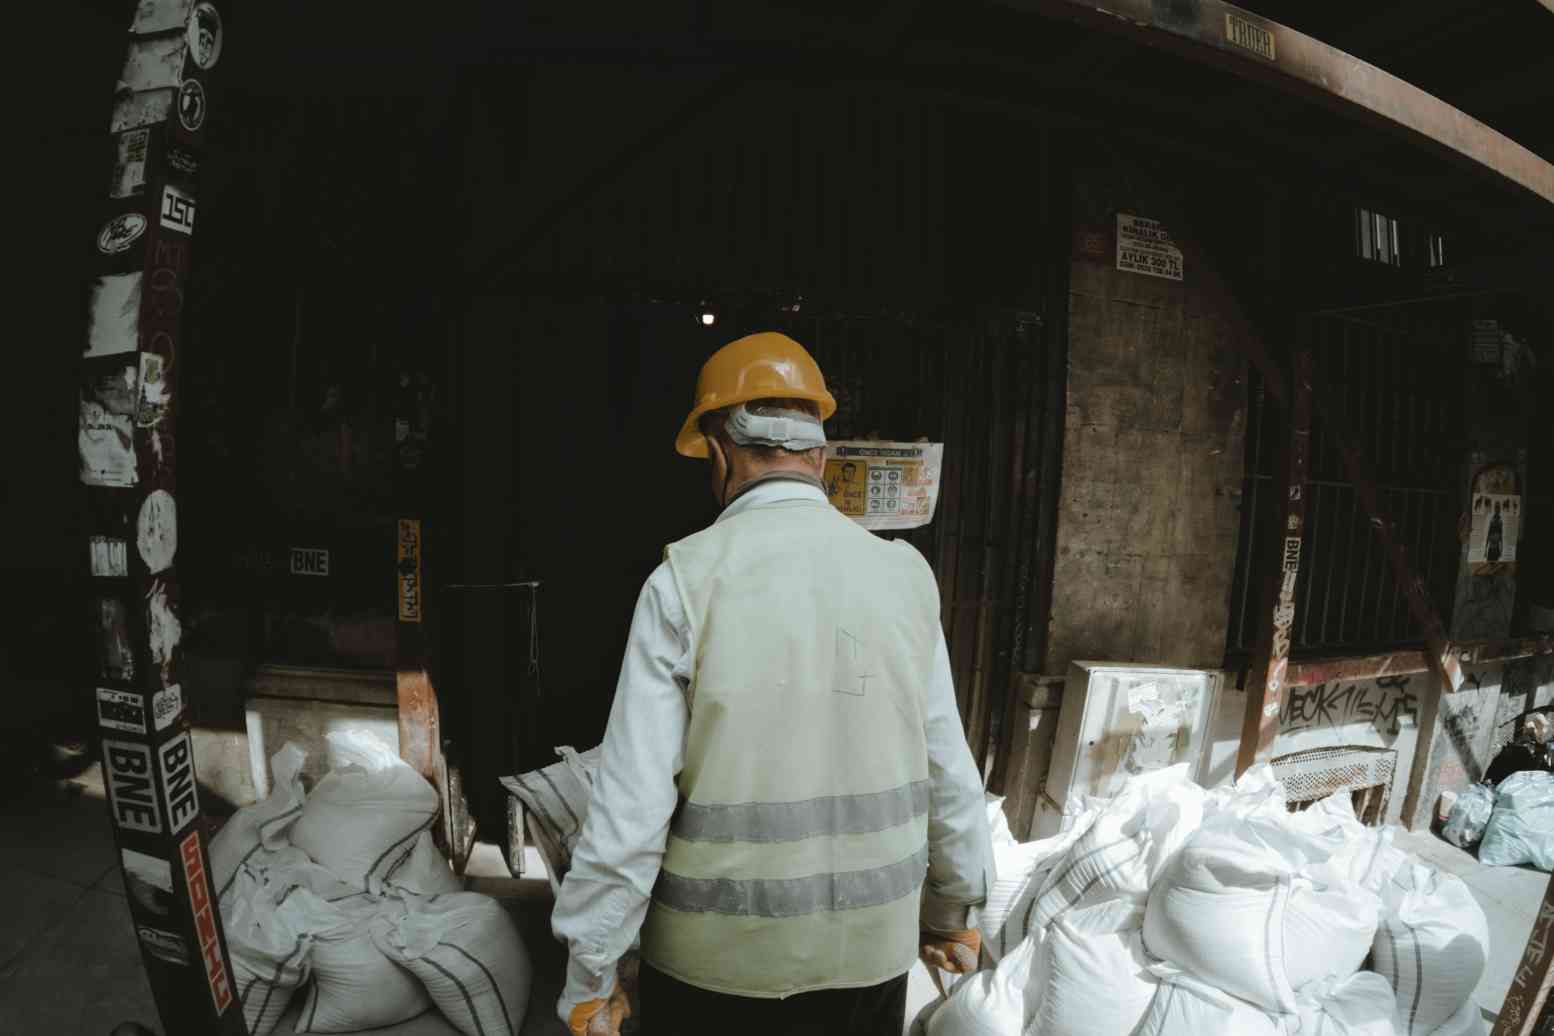 A man in a hard hat and vest walking through some bags.